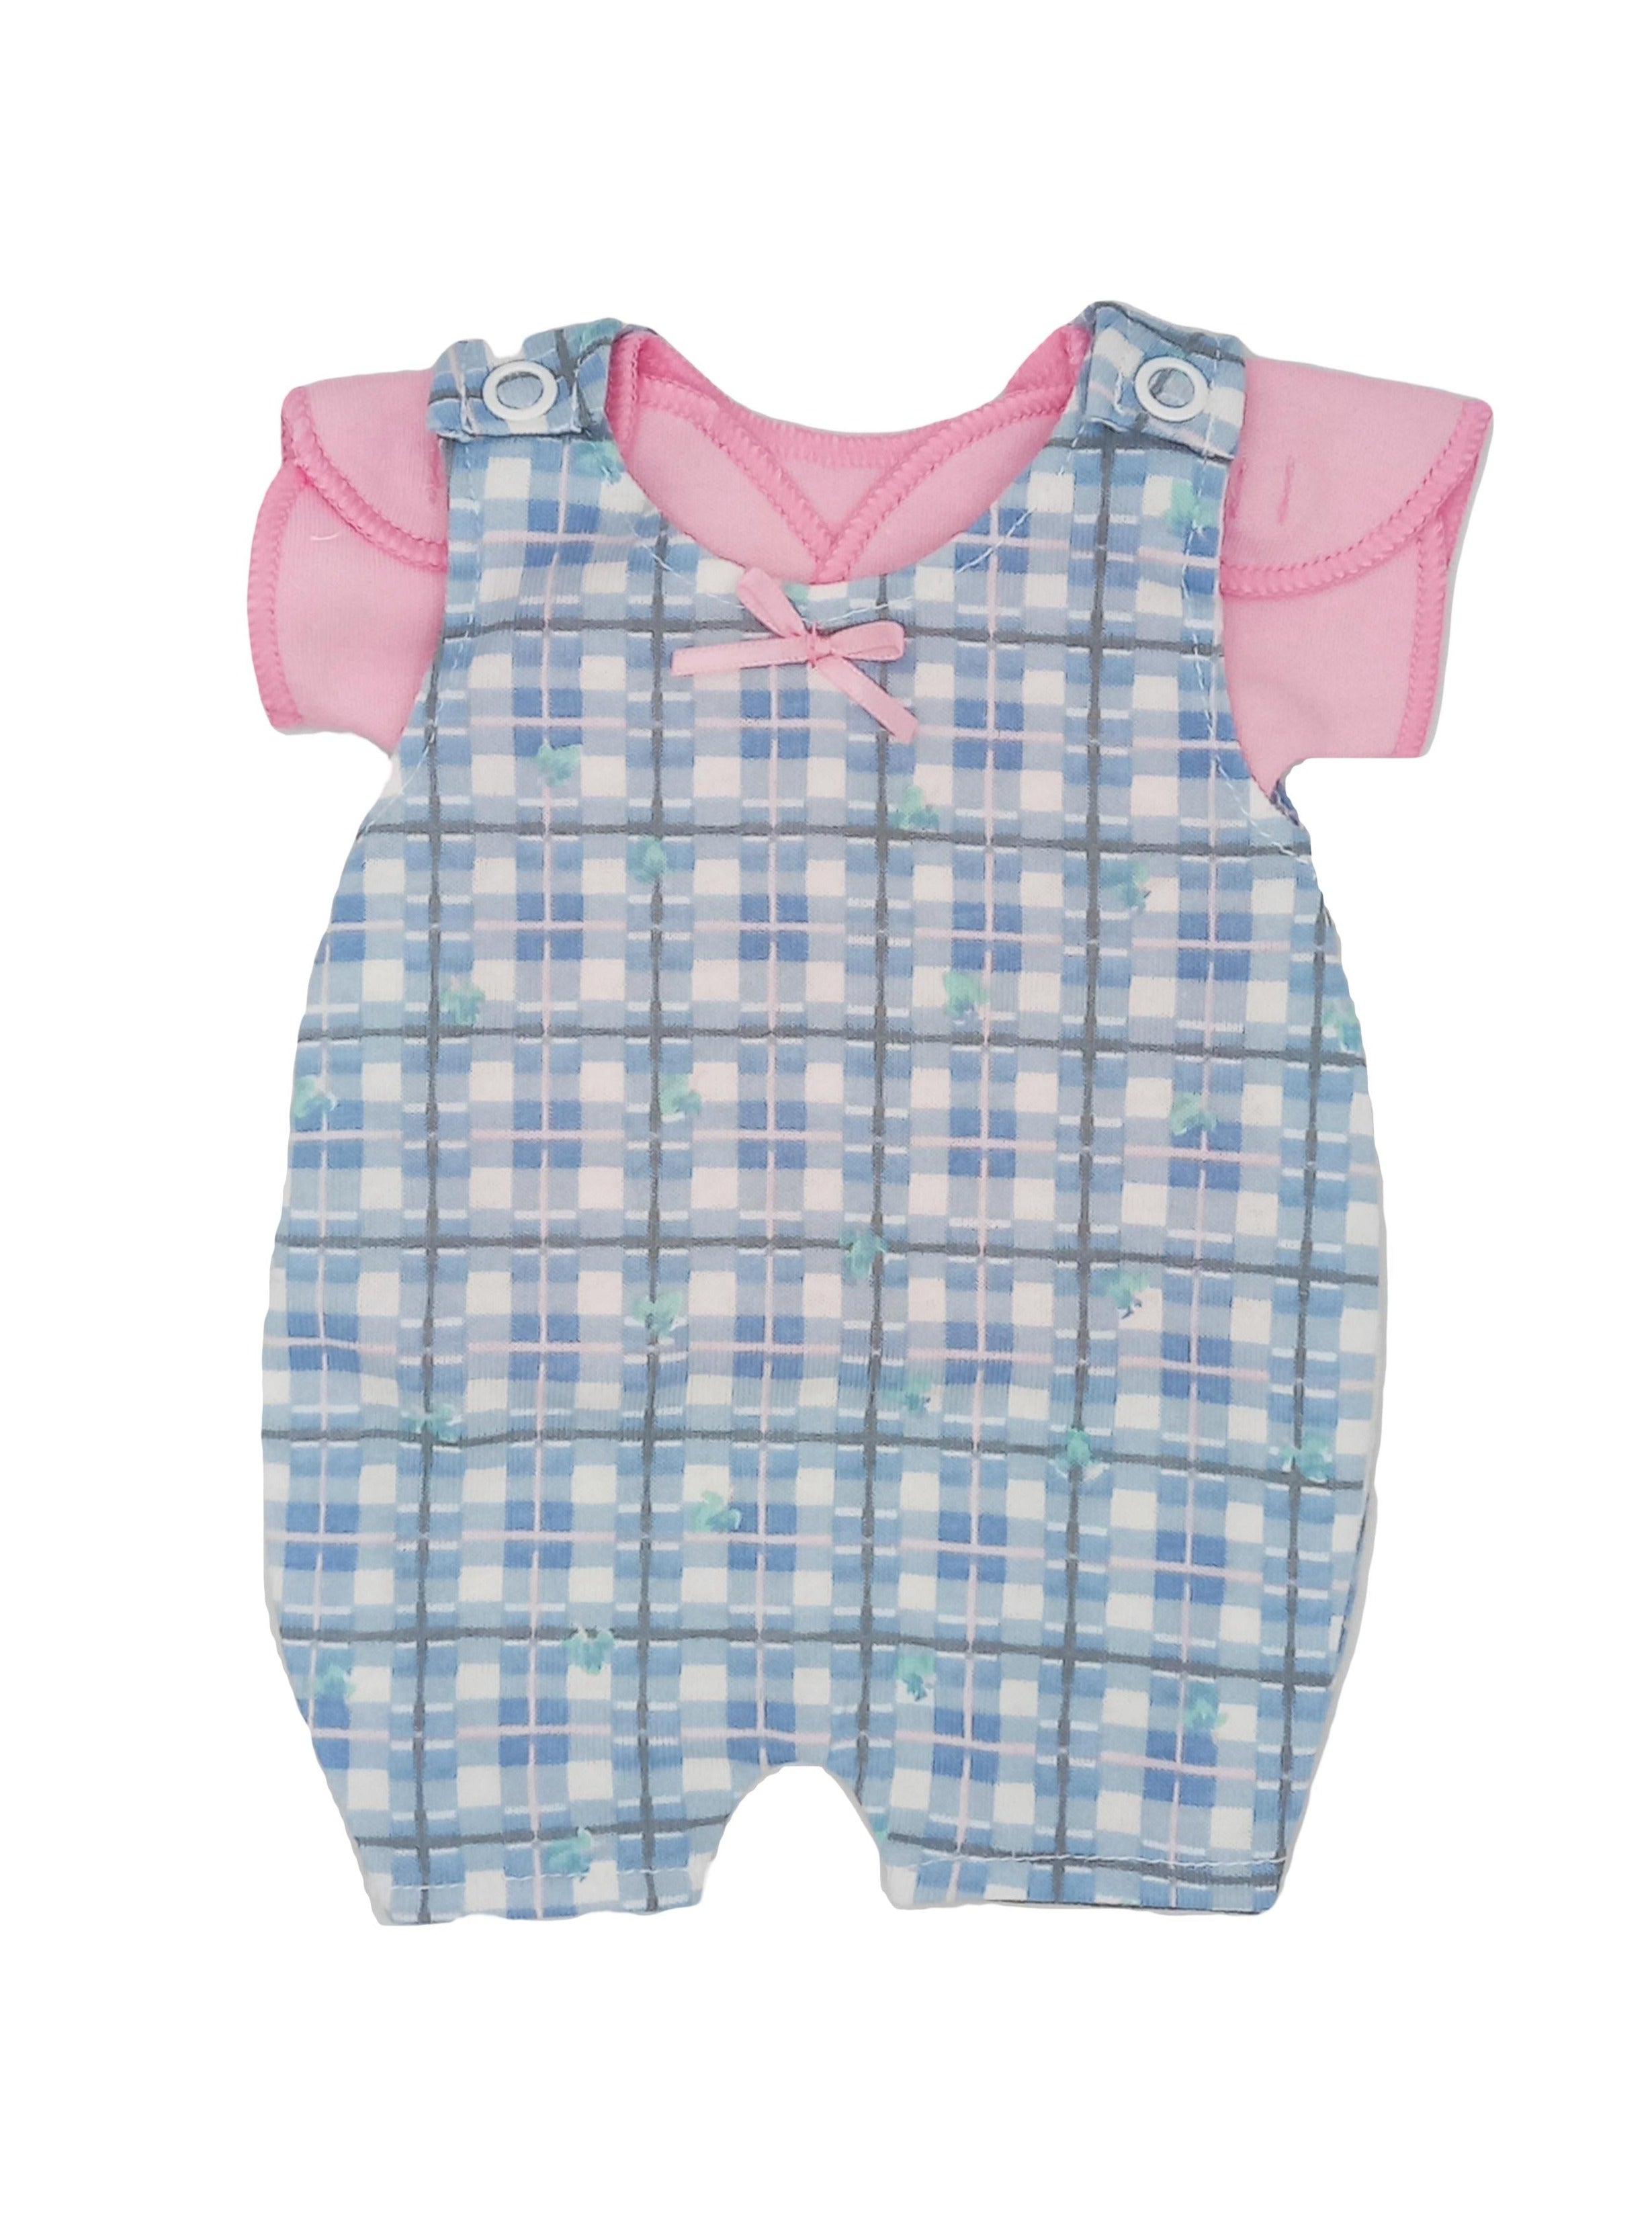 Pink and Blue Check Dungaree and T-shirt Set - Dungaree - Itty Bitty Baby Clothing